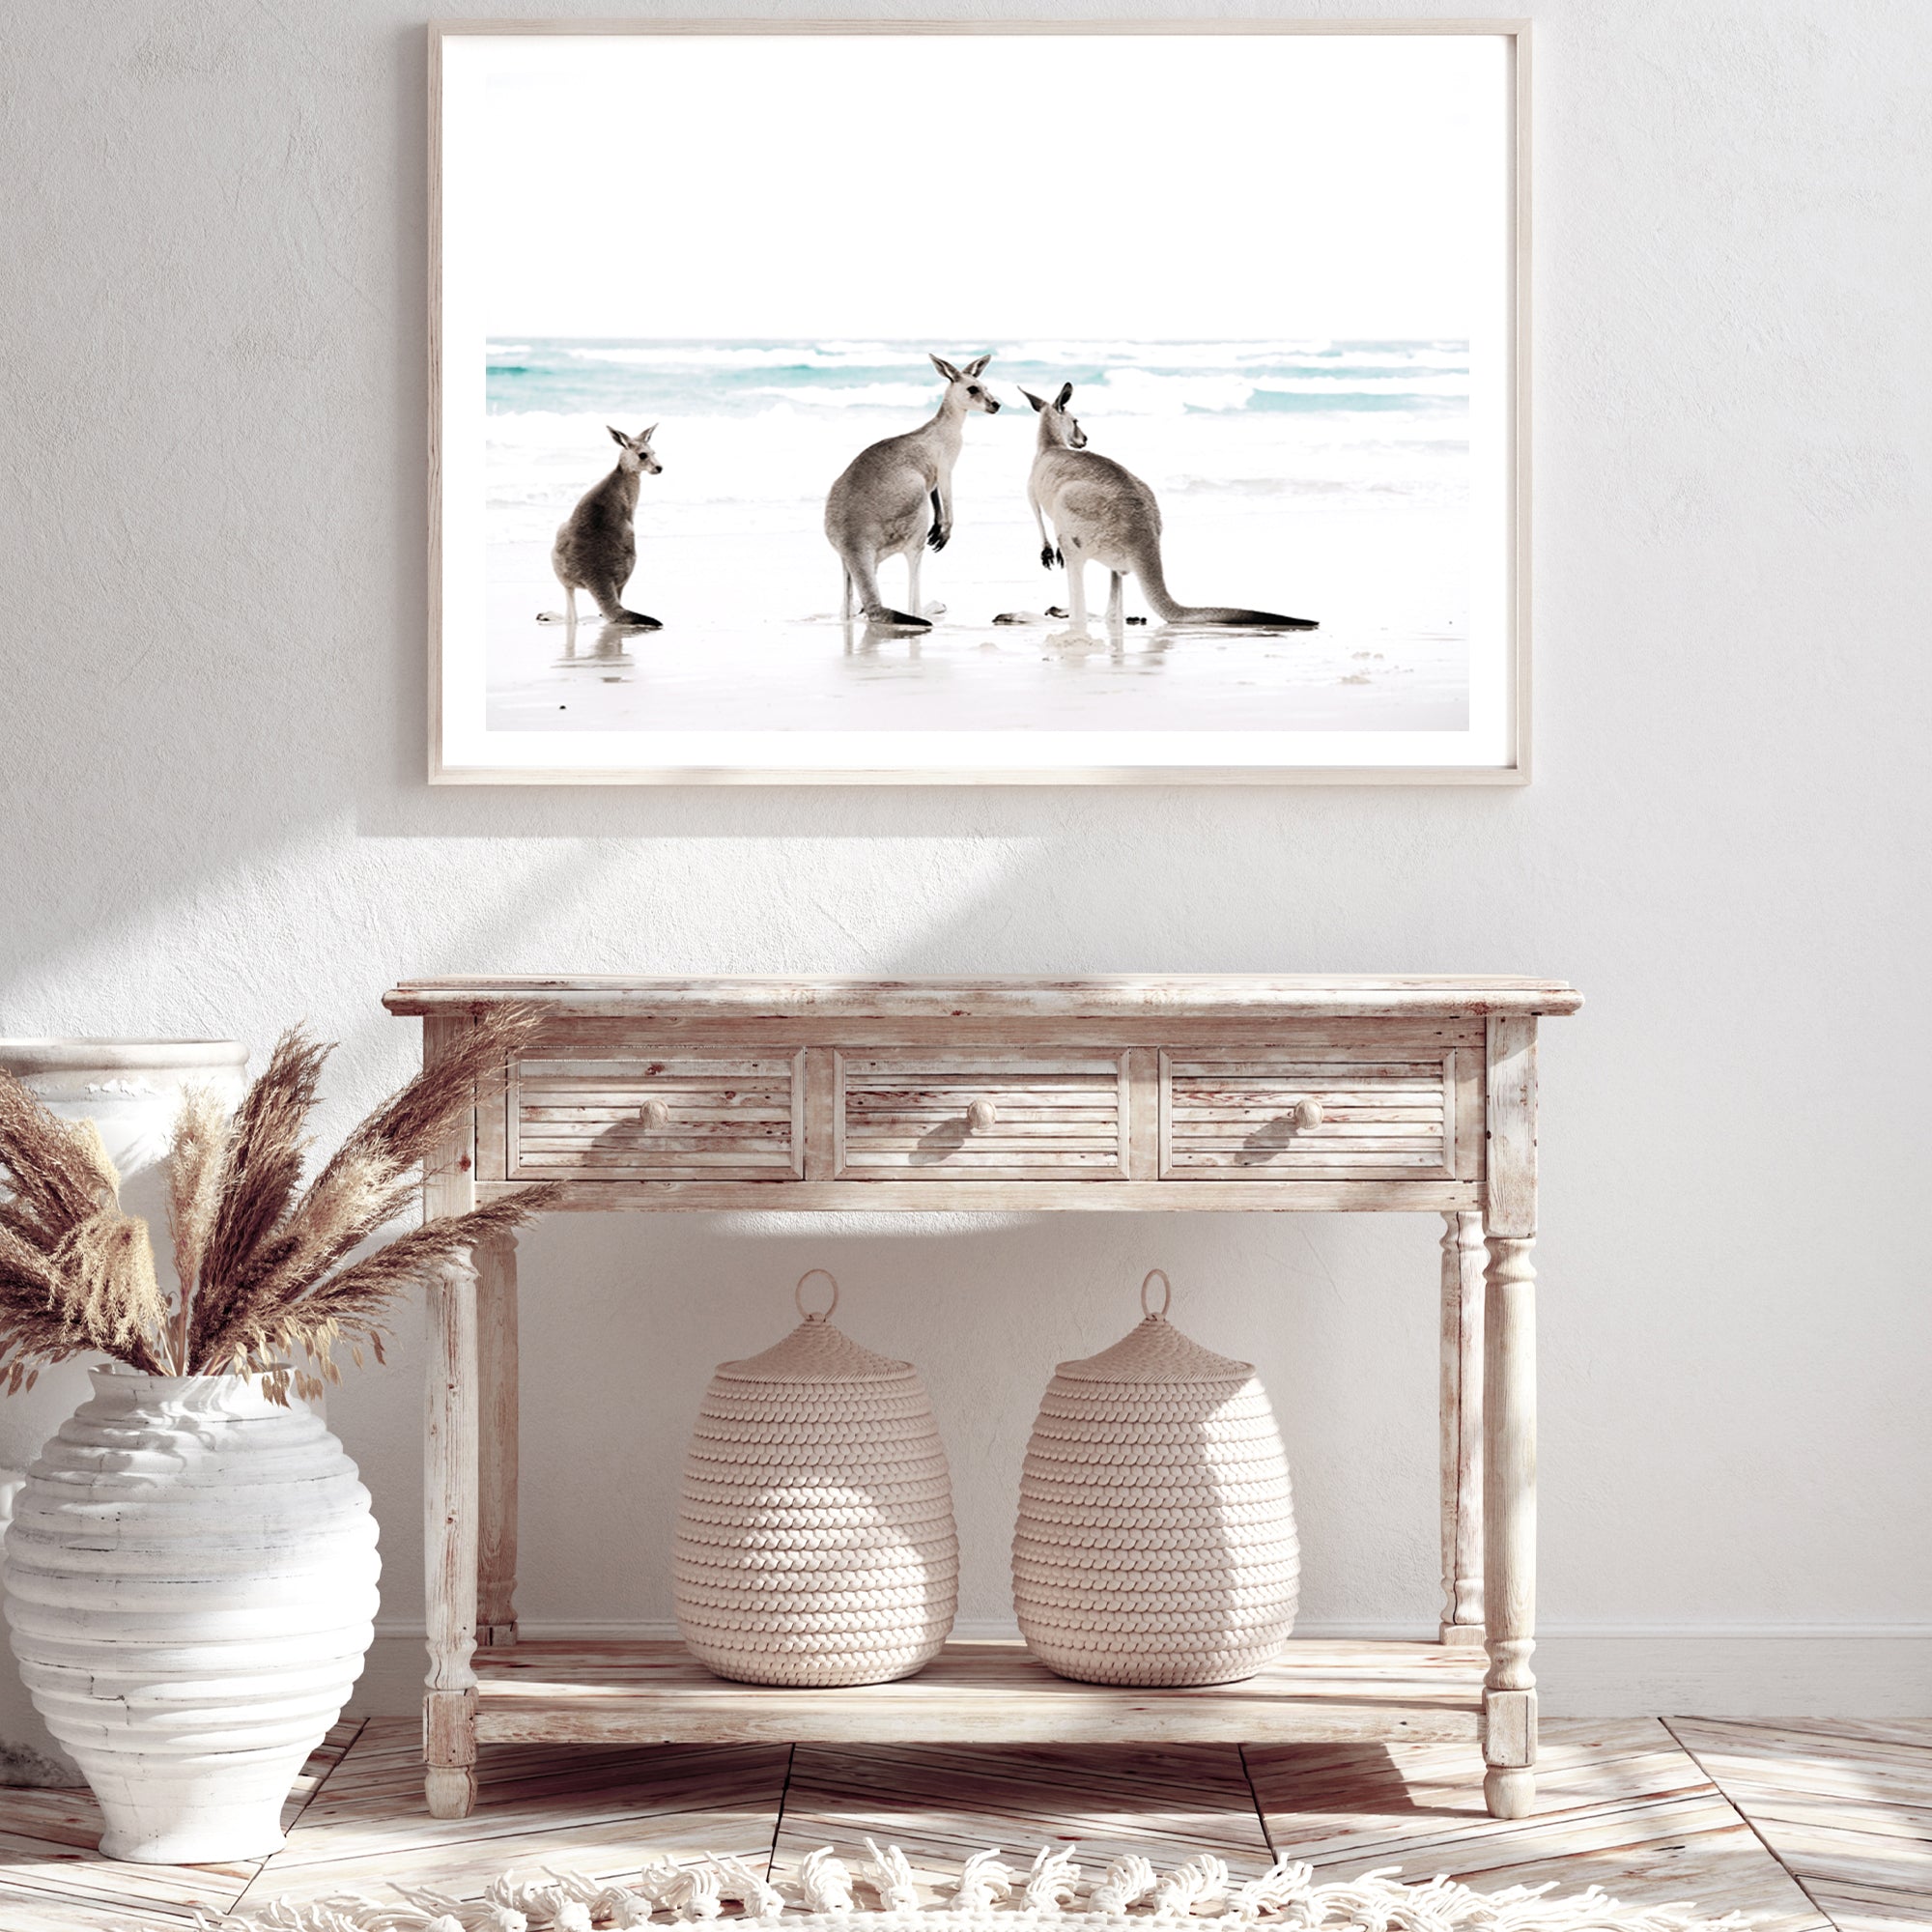 Stretched canvas wall art print of three kangaroos enjoying some time on the beach, available in natural timber, black or white frames.